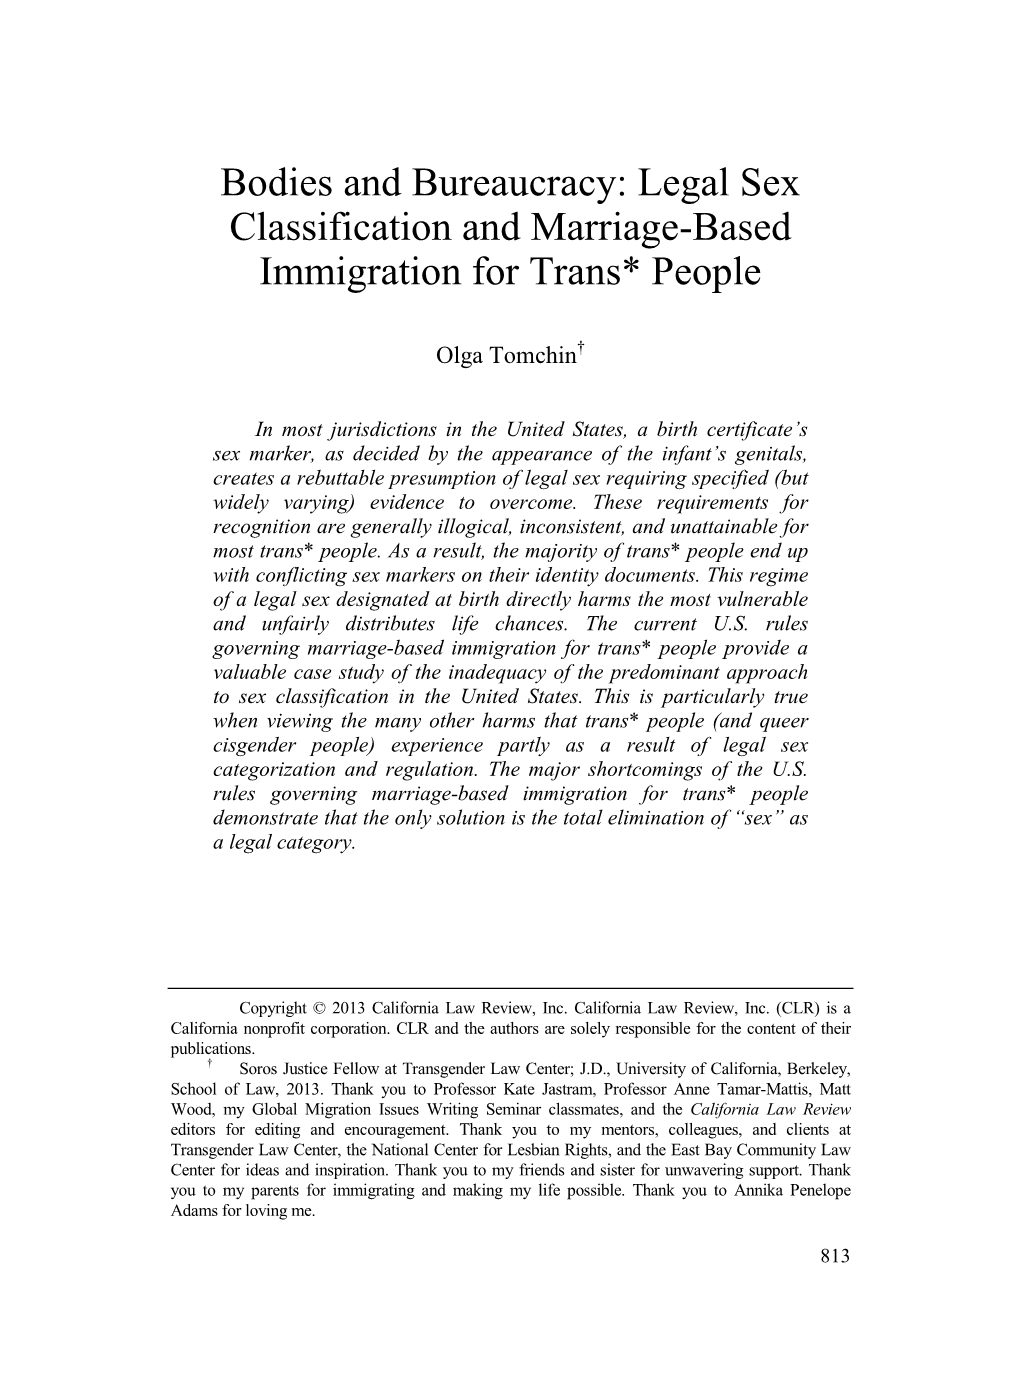 Bodies and Bureaucracy: Legal Sex Classification and Marriage-Based Immigration for Trans* People